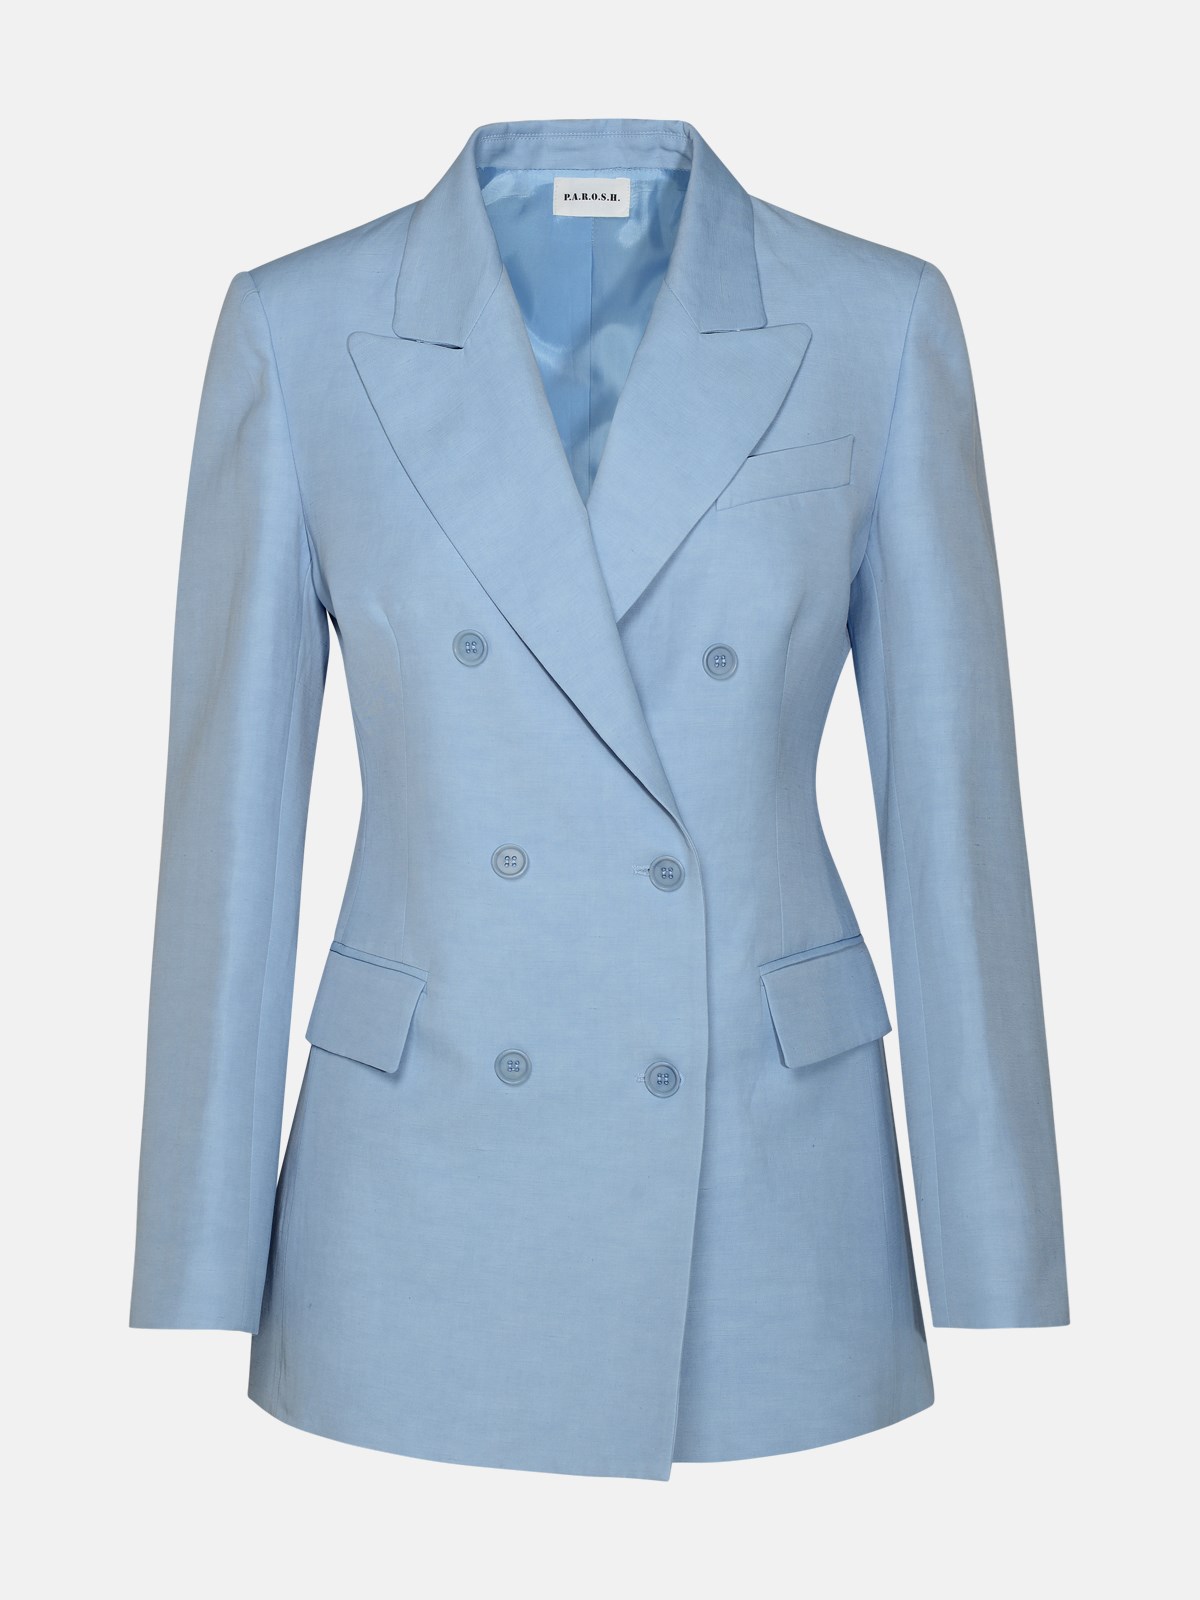 P.a.r.o.s.h. 'raisa' Double-breasted Jacket In Light Blue Linen Blend